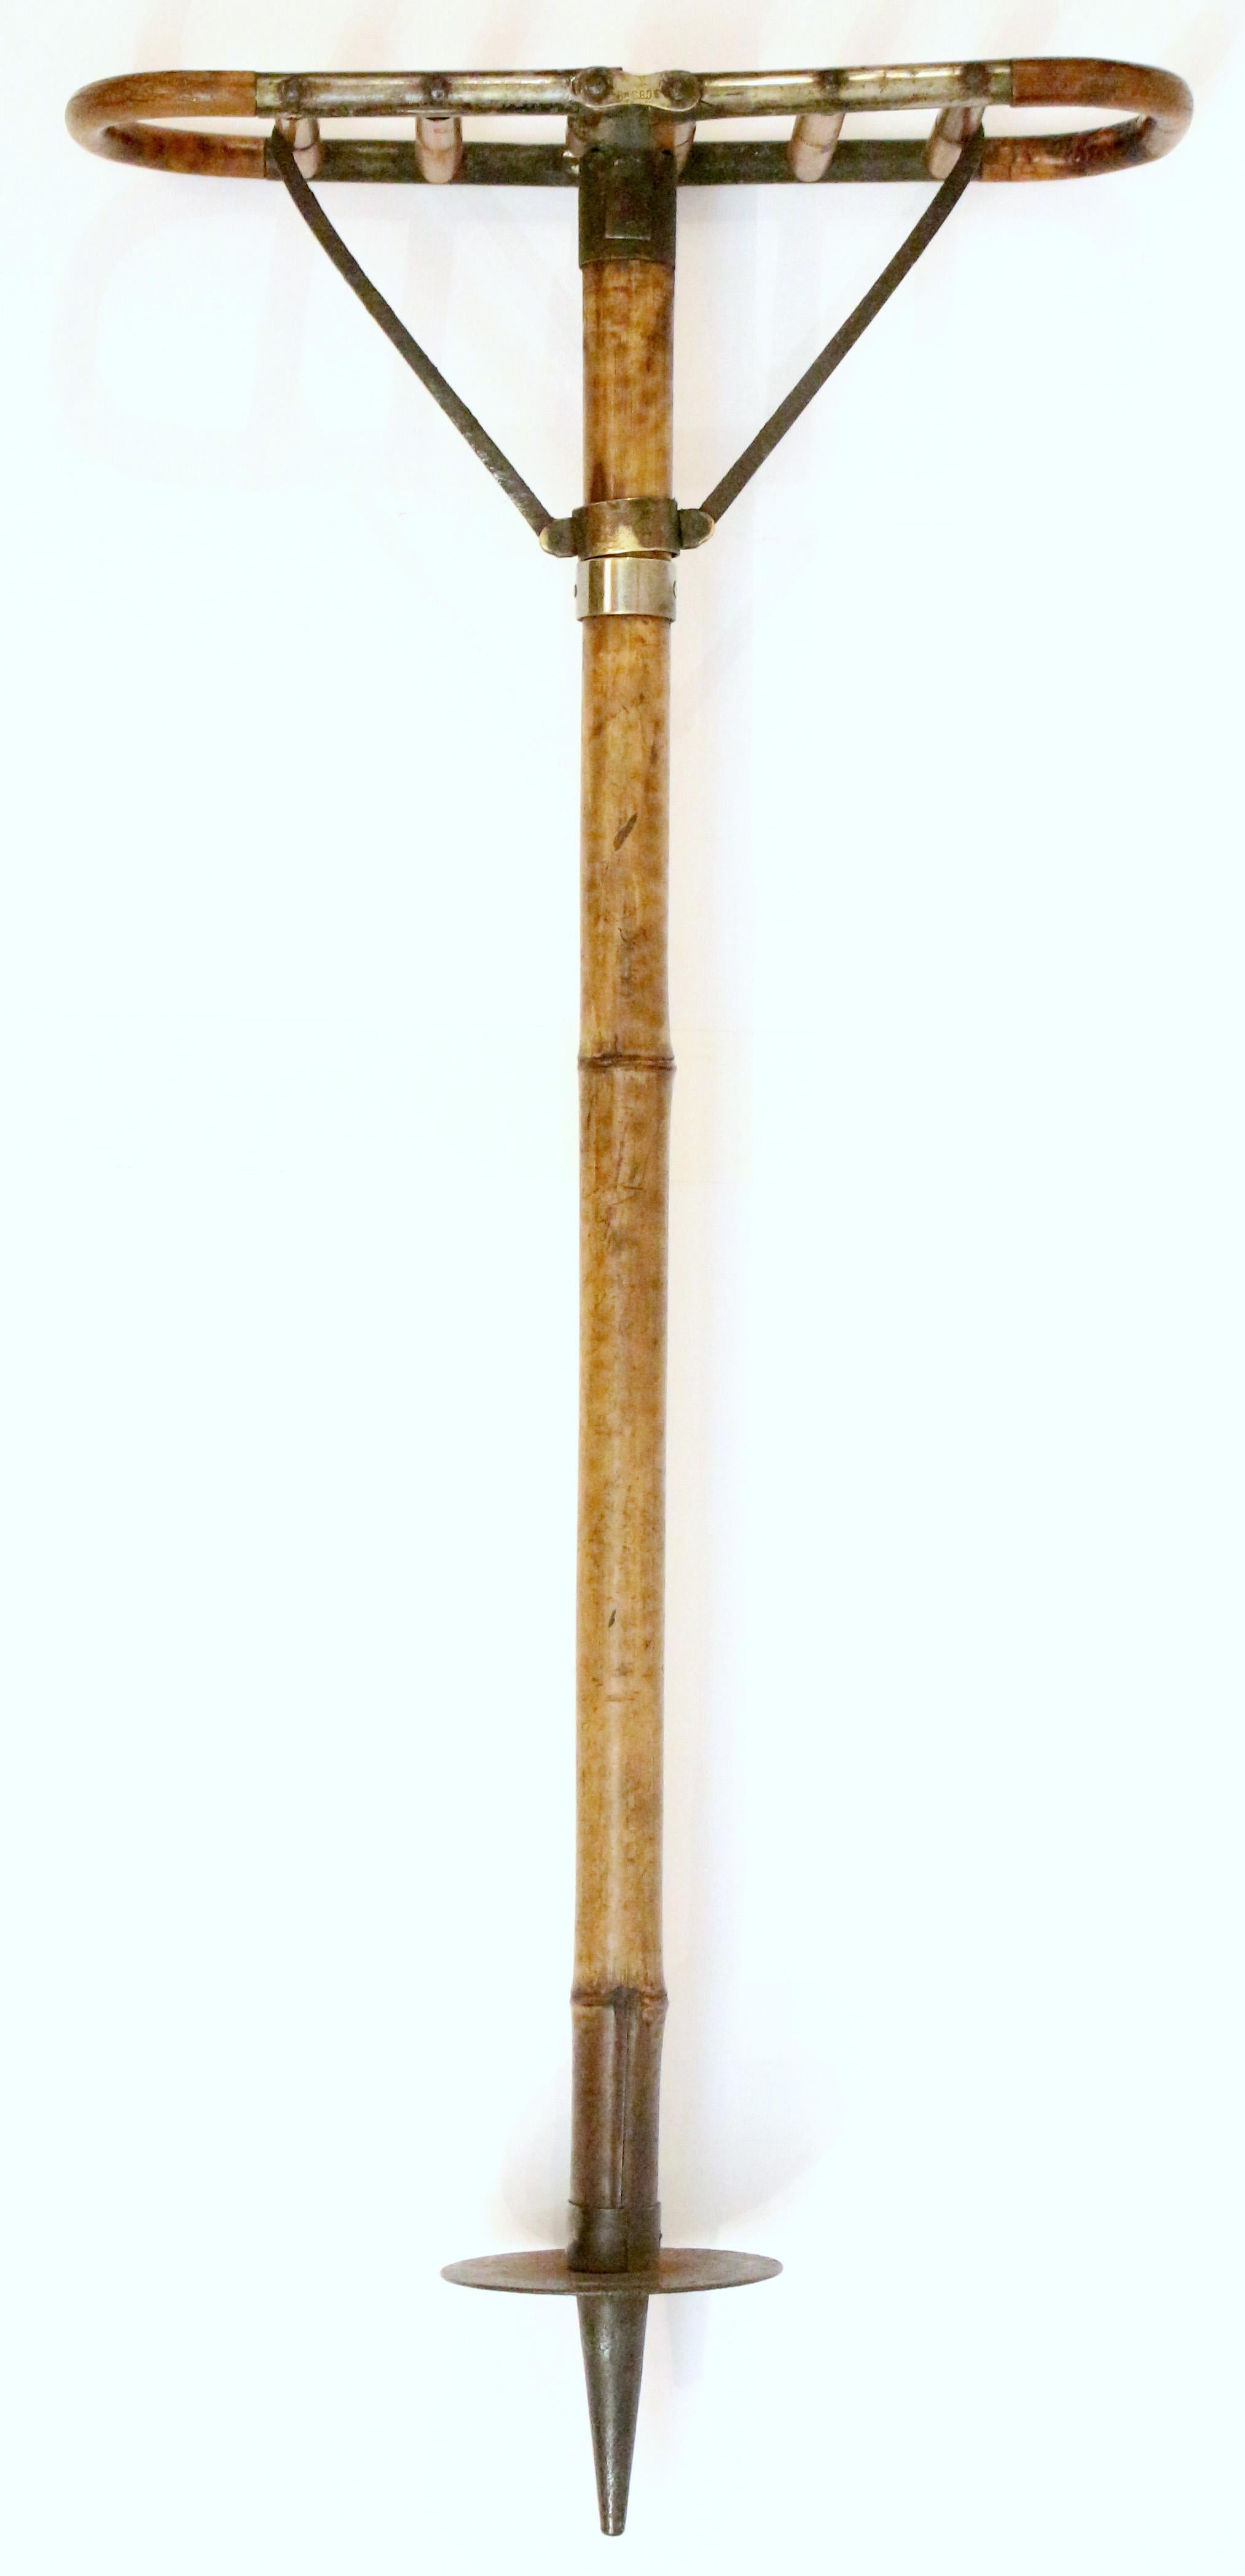 Late 19th century bamboo & brass sporting event or hunting walking stick with seat, English. Well figured bamboo. Good brass cuffs & supports. Iron shafts for seat support. Marked 